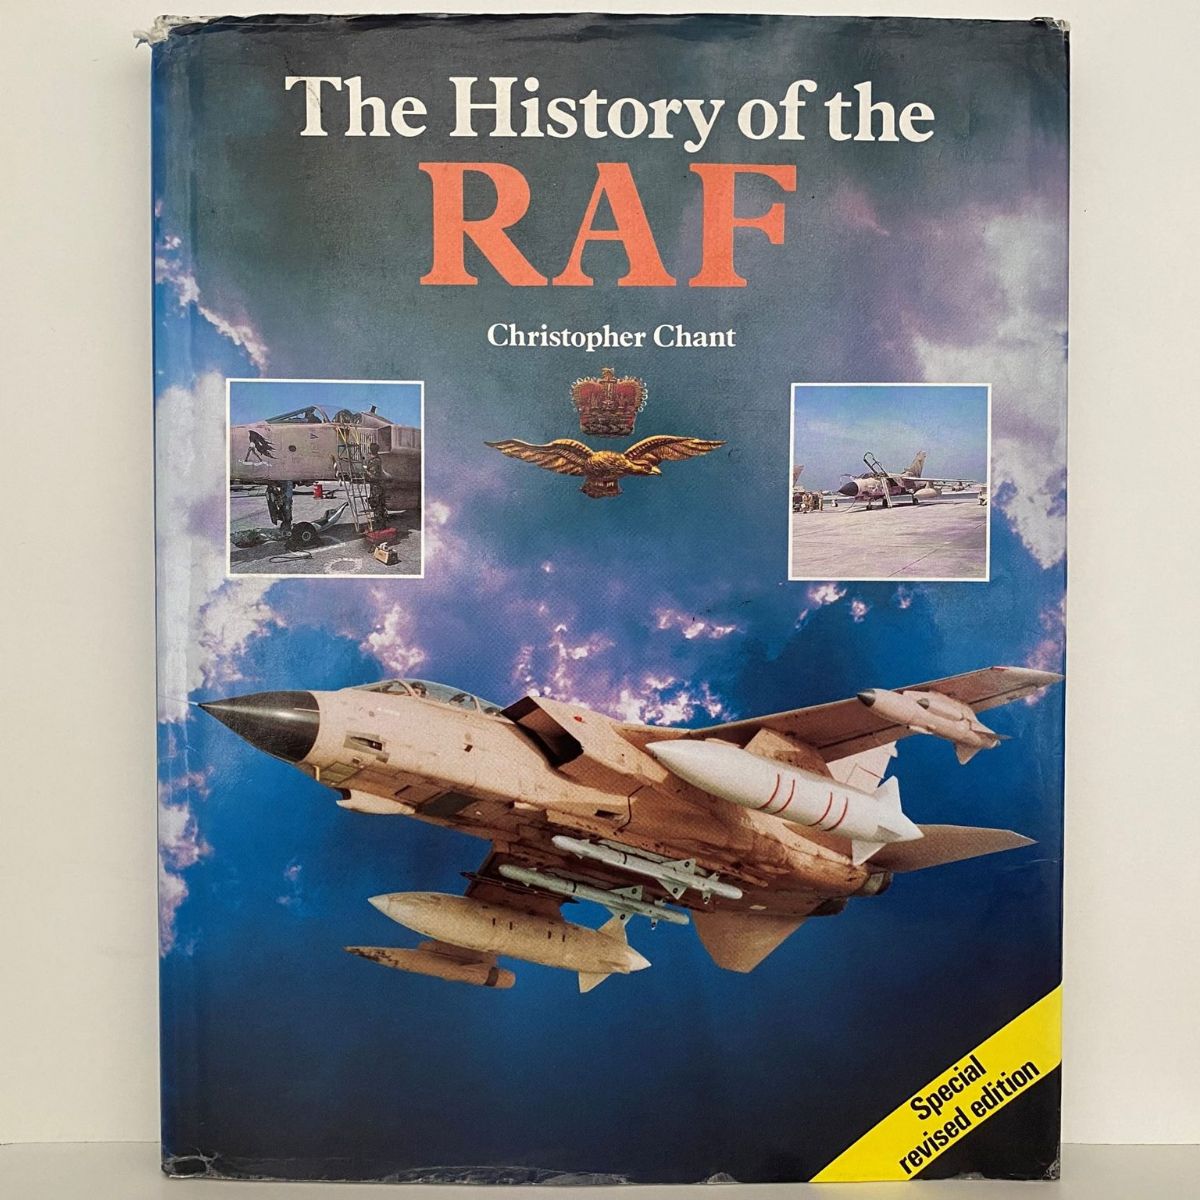 THE HISTORY OF THE RAF